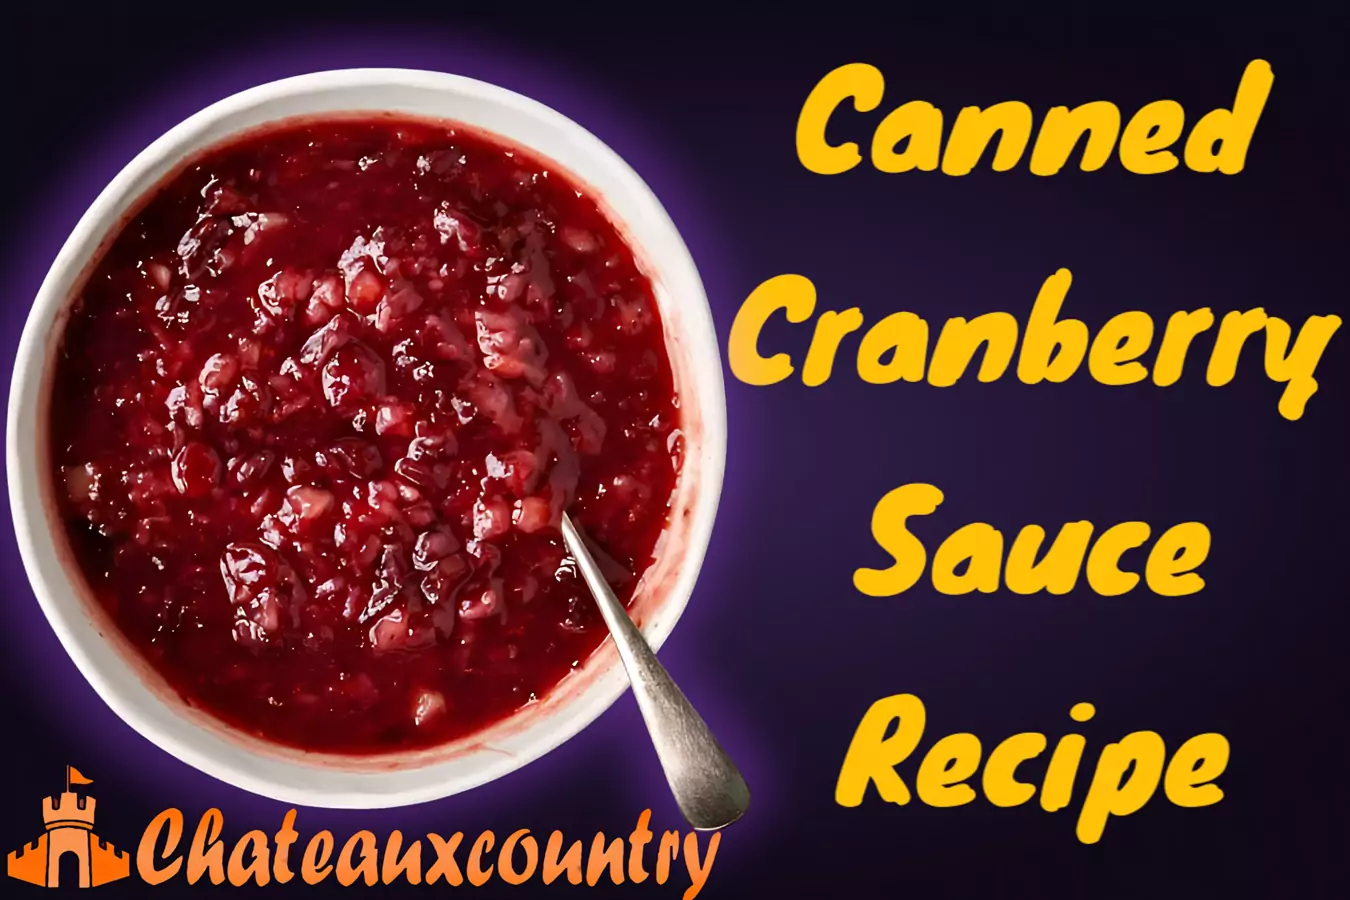 Canned Cranberry Sauce Recipes